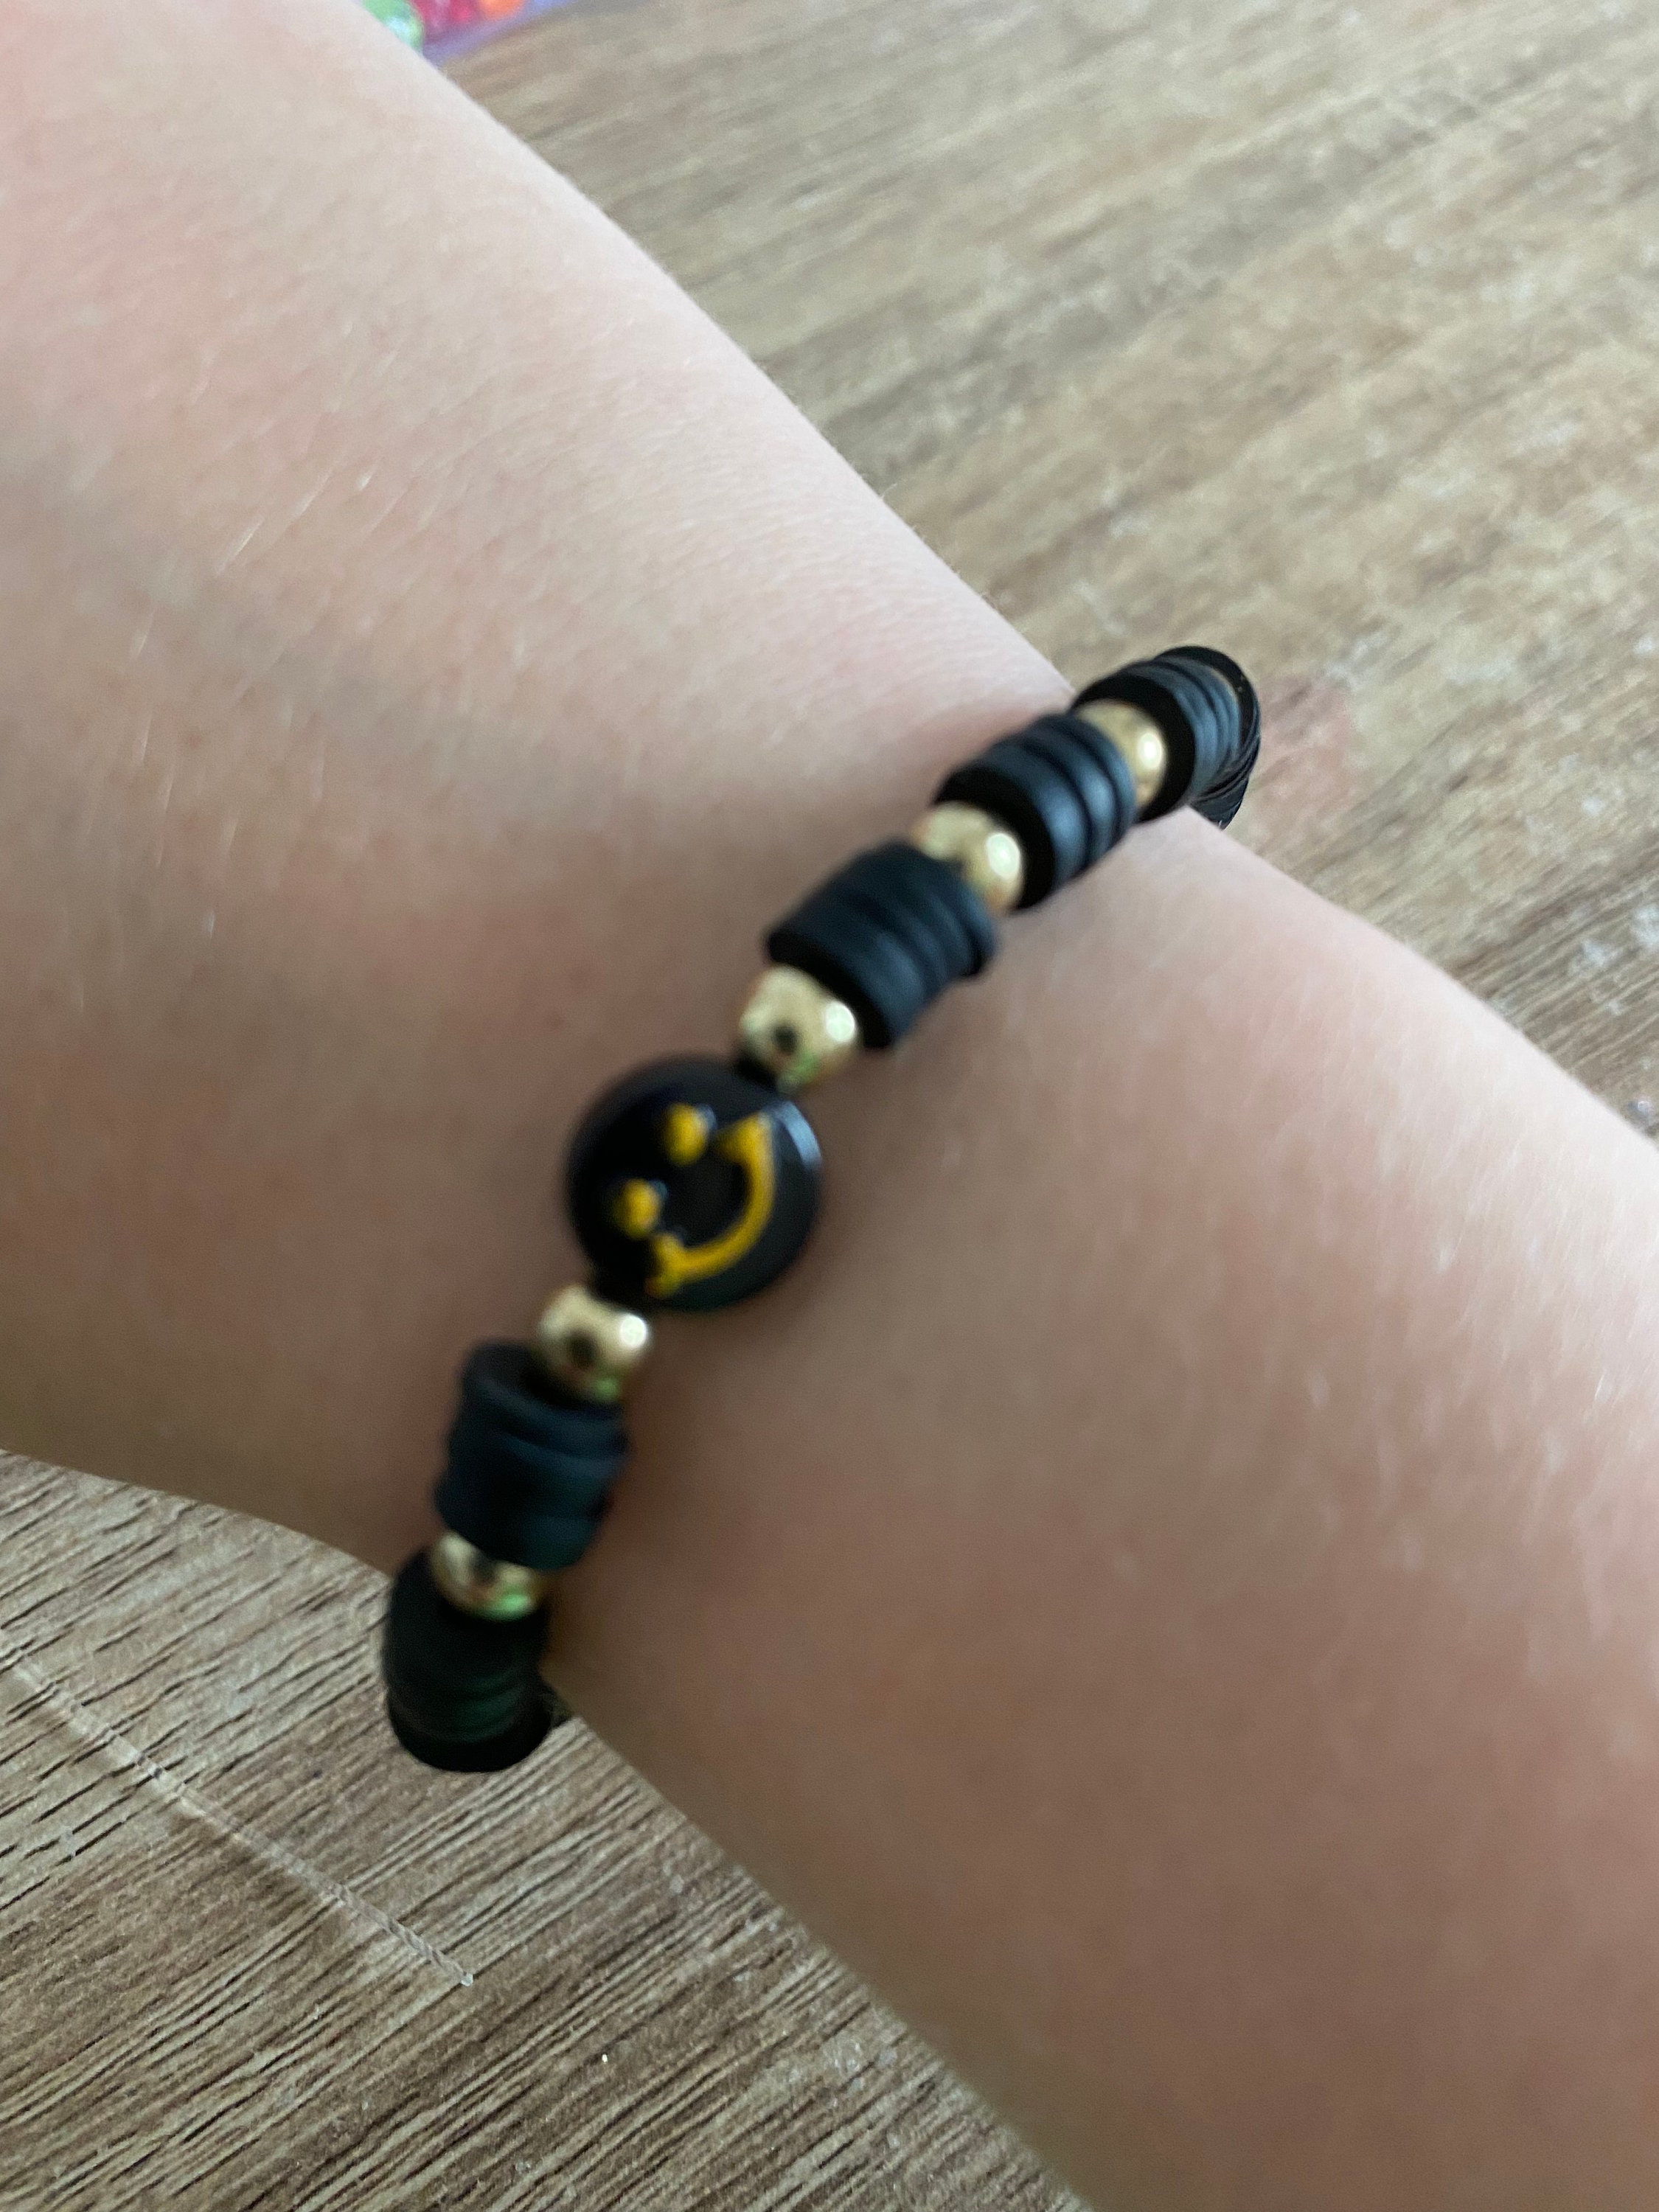 Black Clay Beaded Bracelet with Black and Gold Happy Face Charm